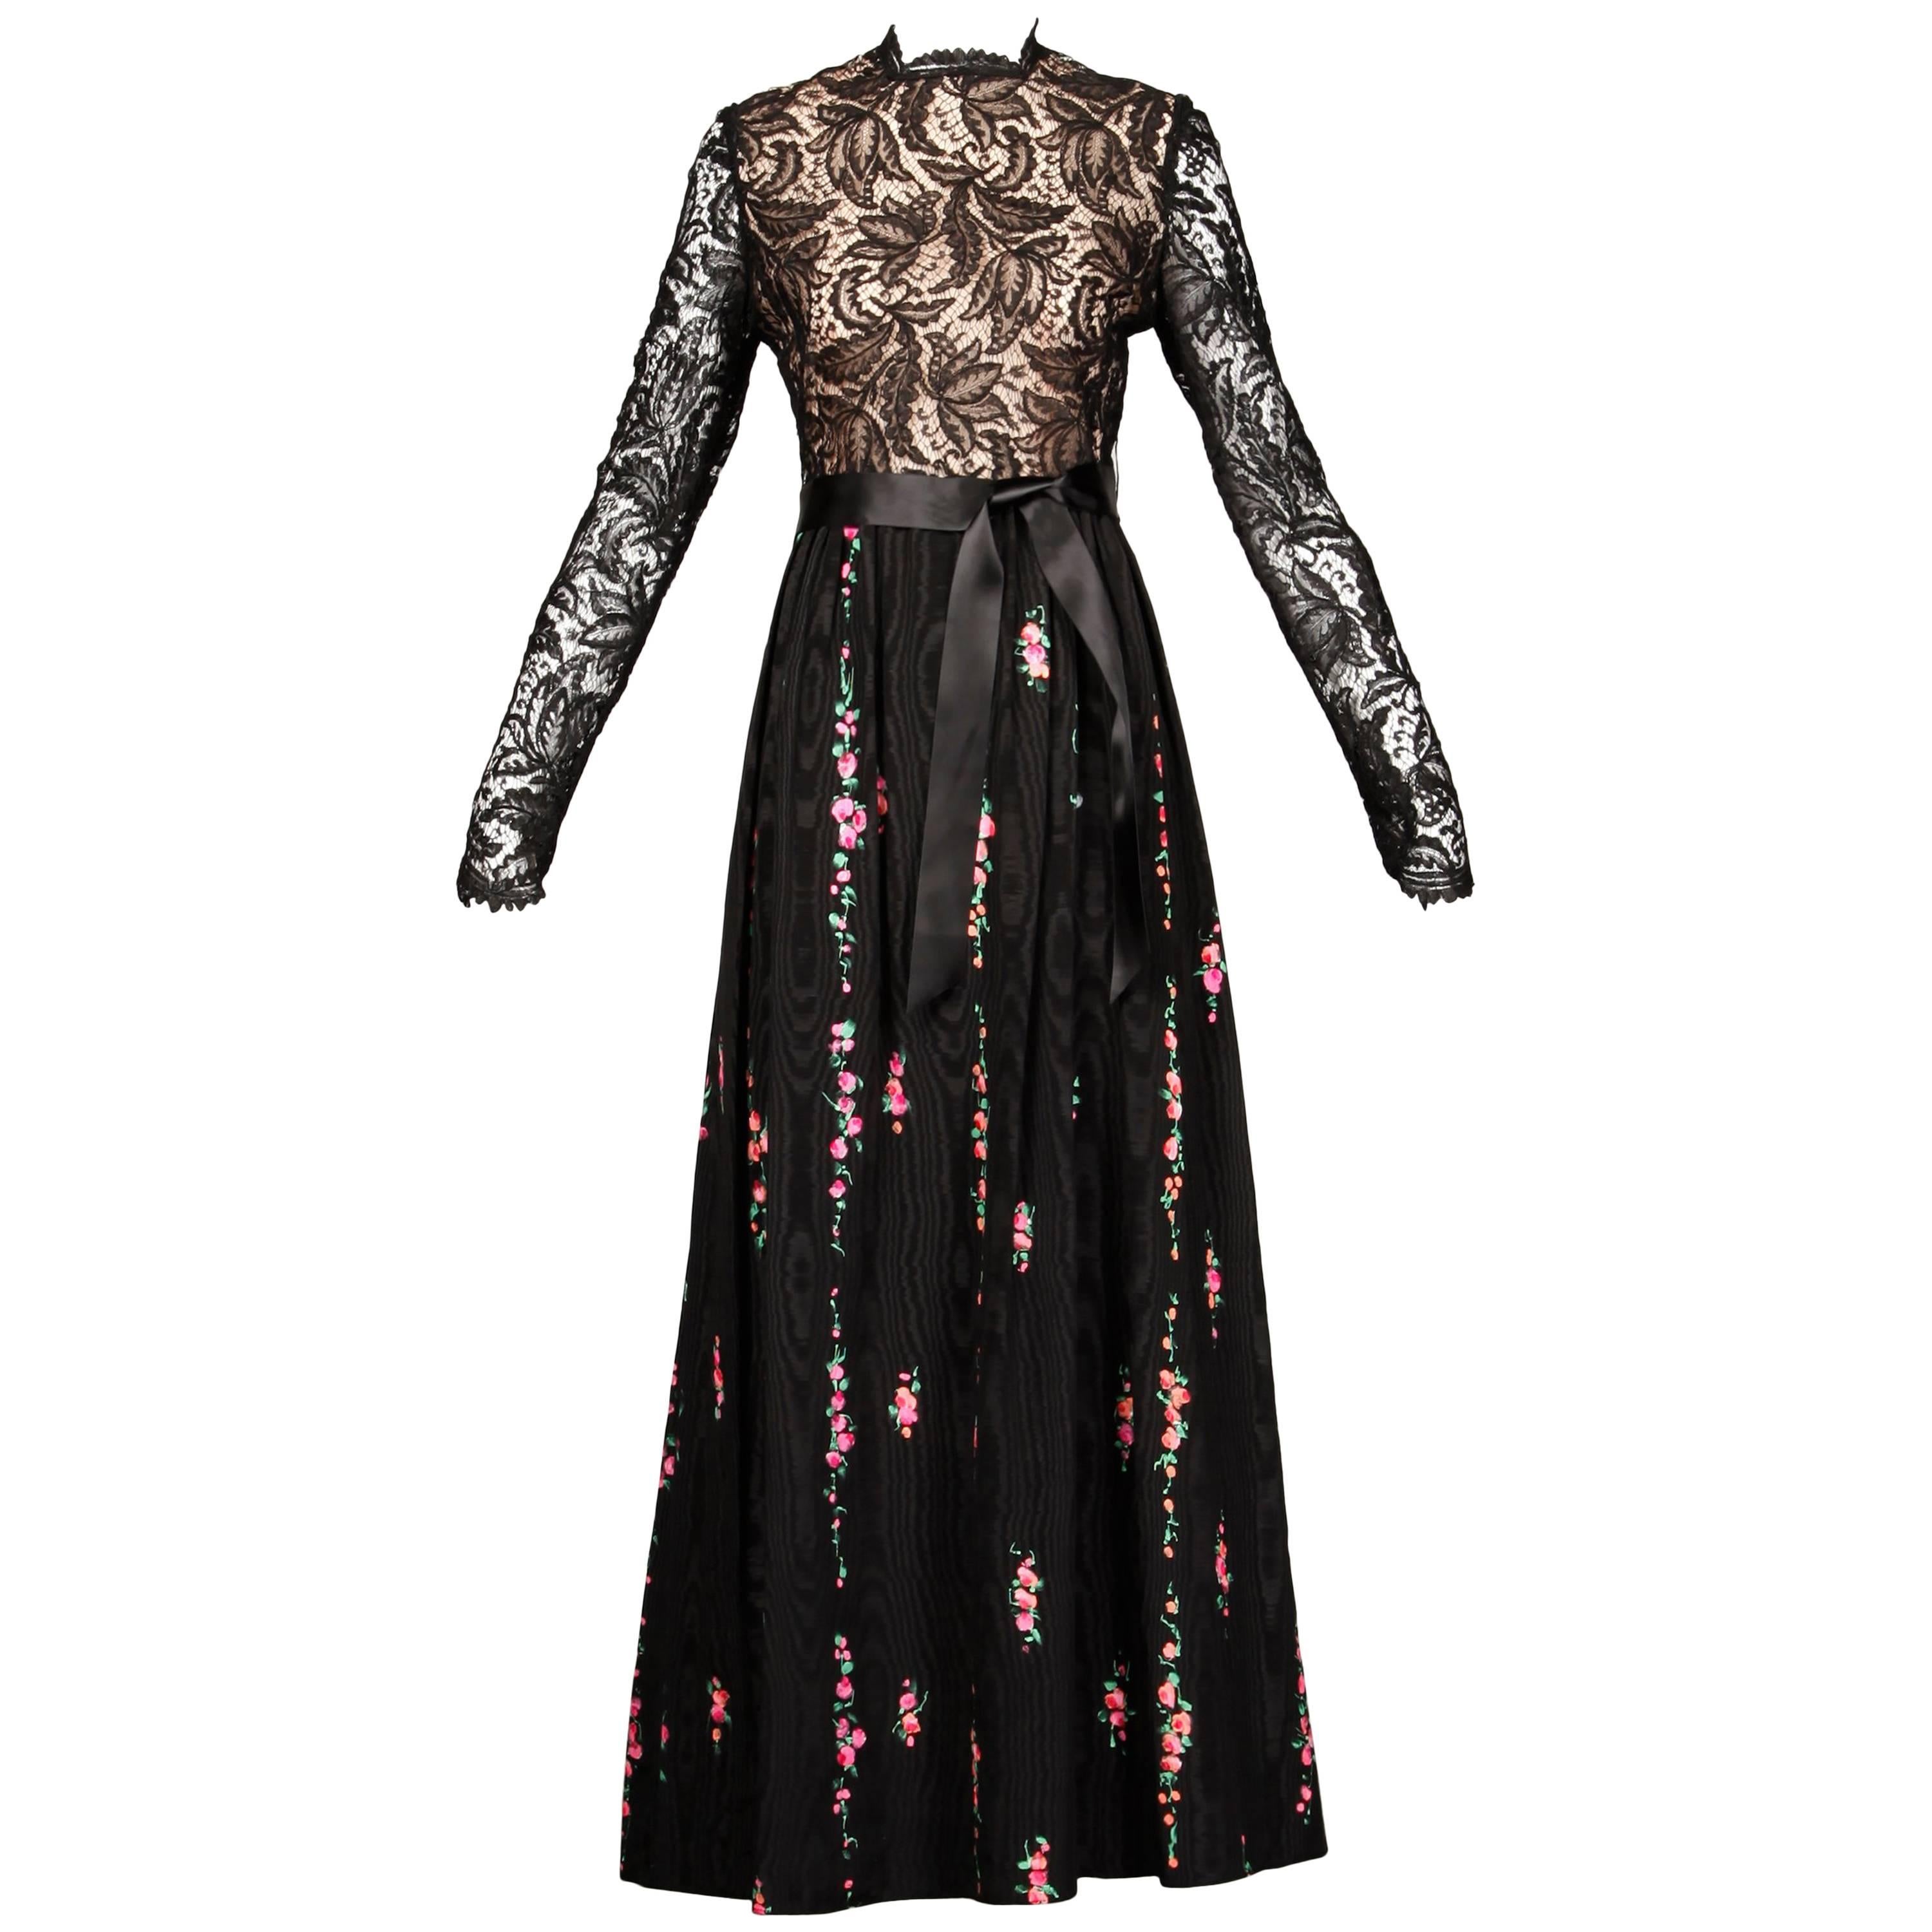  Richilene Vintage Black Lace Hand-Painted Silk Dress with Tags, 1970s   For Sale